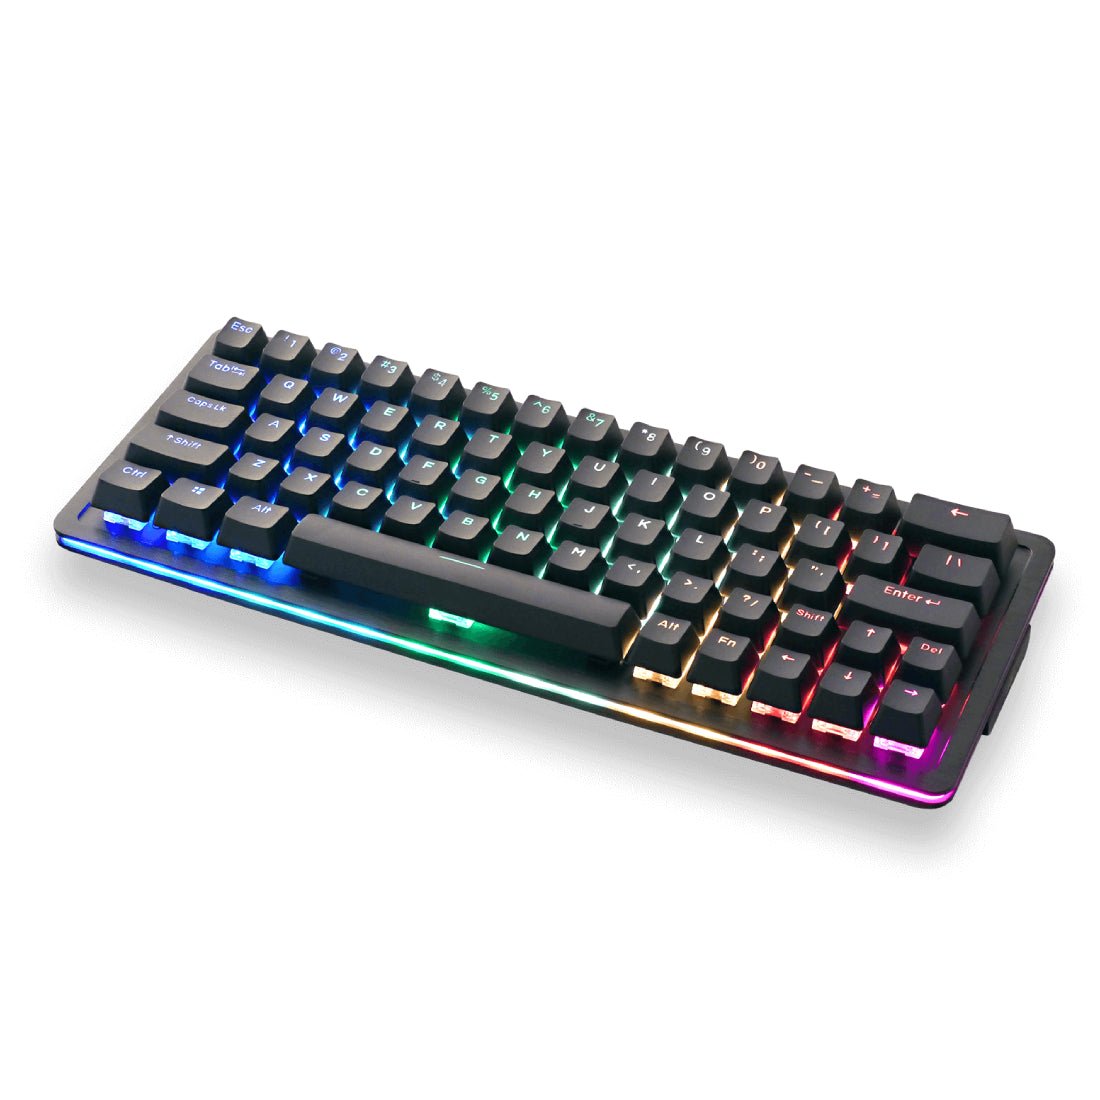 Mountain Everest 60 Linear 45 Speed Switch Mechanical Gaming Keyboard - Black - Store 974 | ستور ٩٧٤